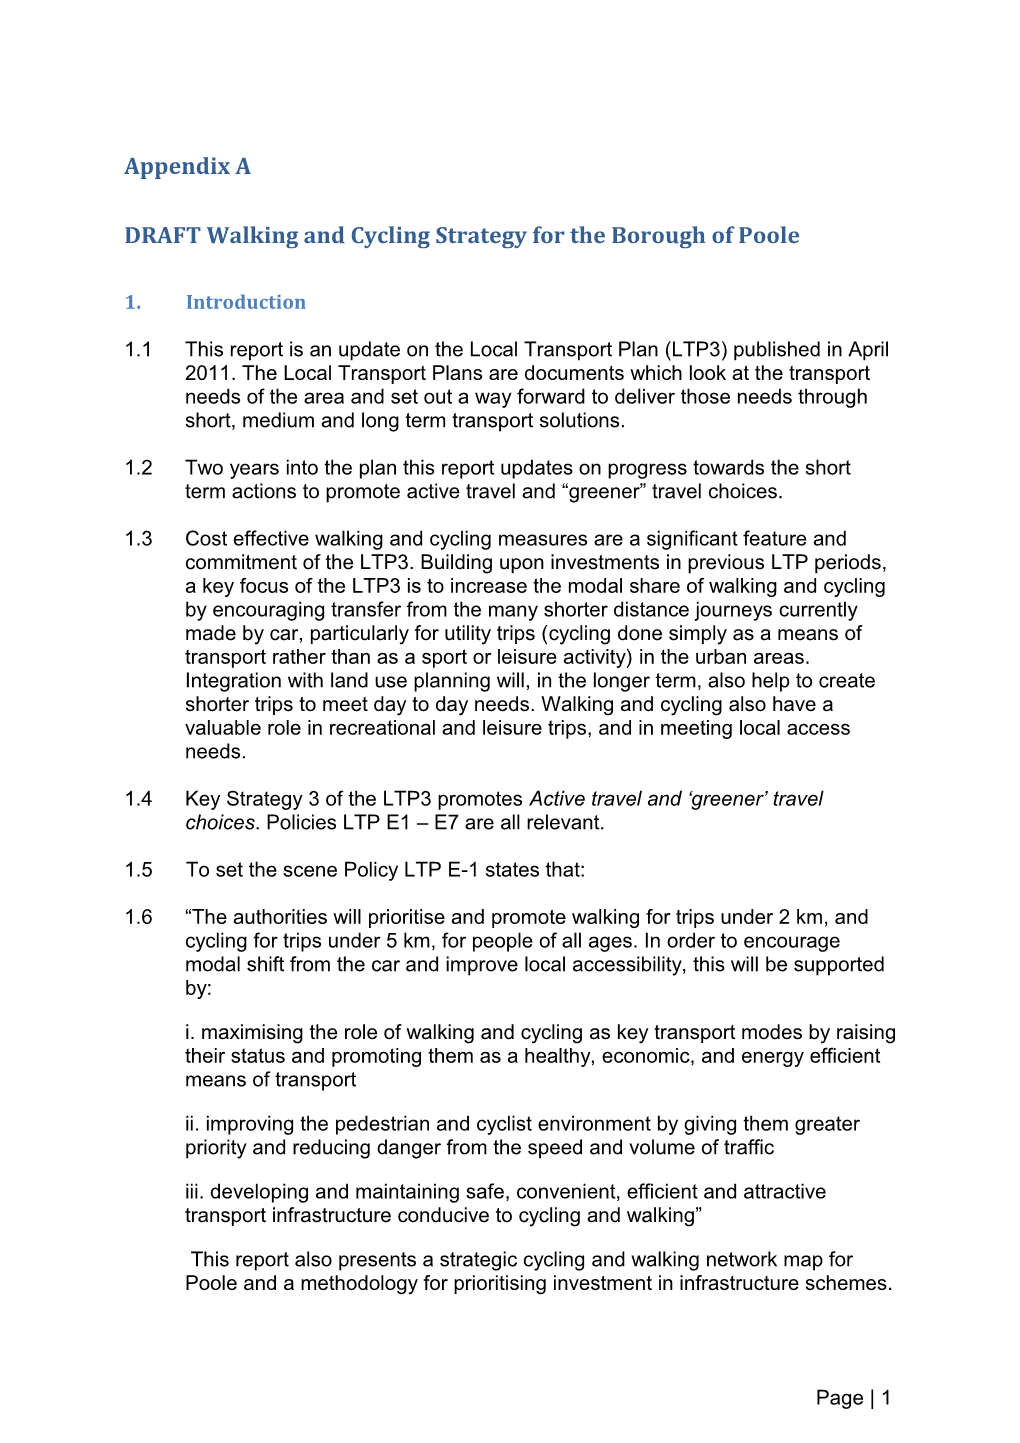 DRAFT Walking and Cycling Strategy for the Borough of Poole